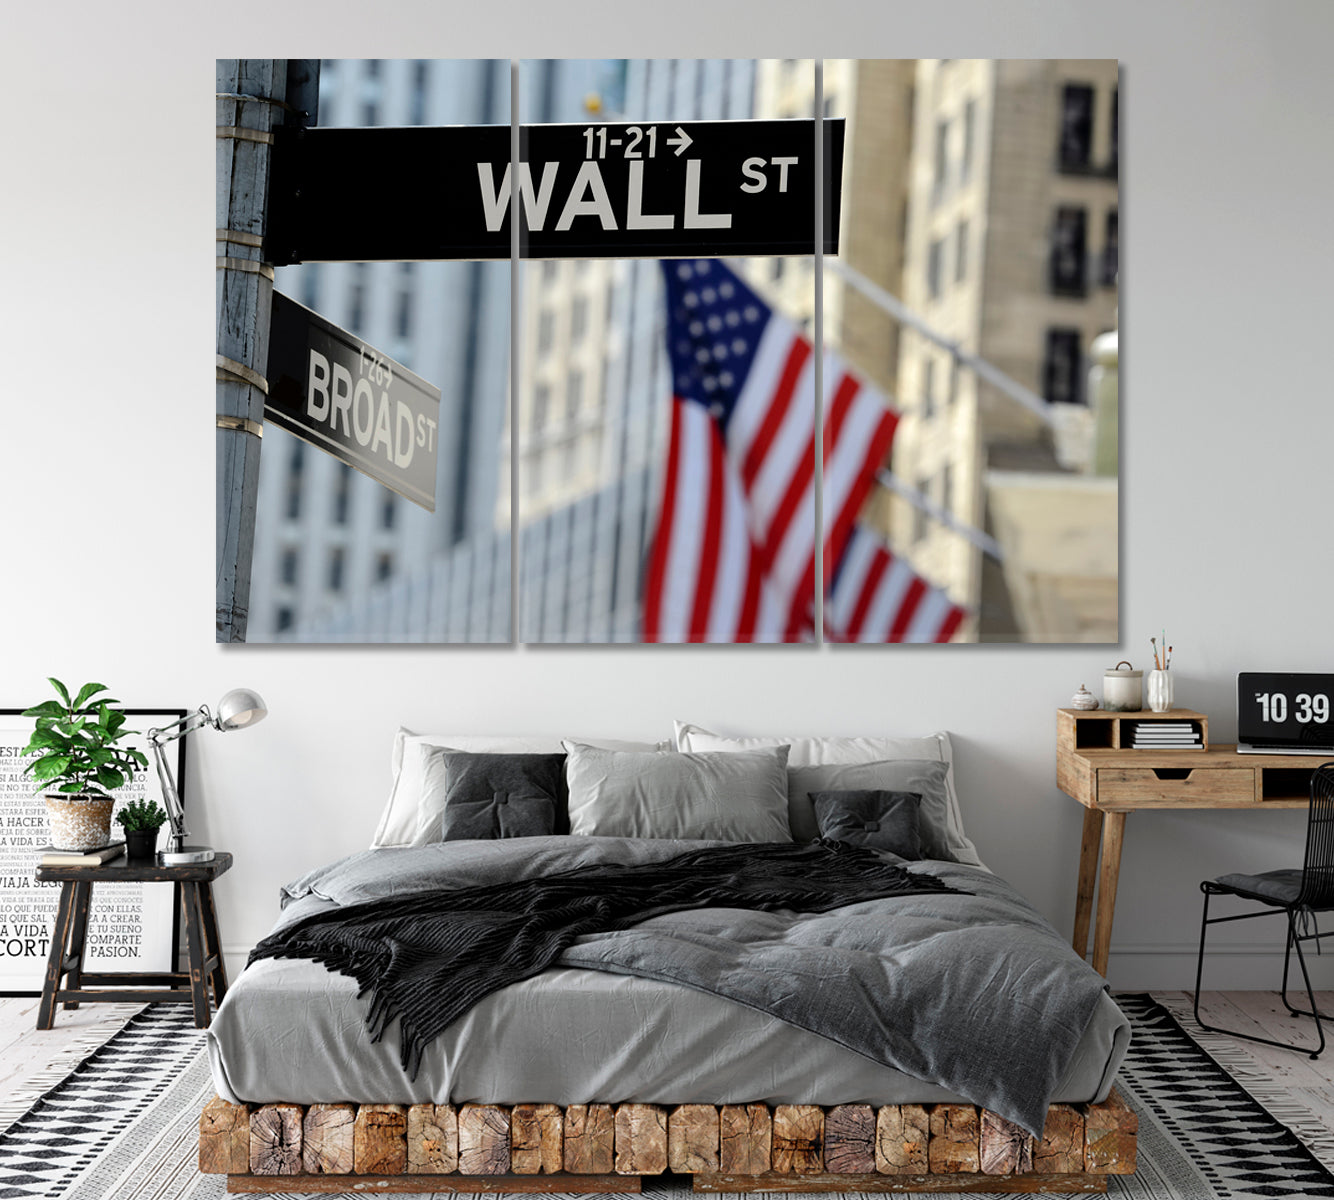 Wall Street Sign Canvas Print ArtLexy 3 Panels 36"x24" inches 